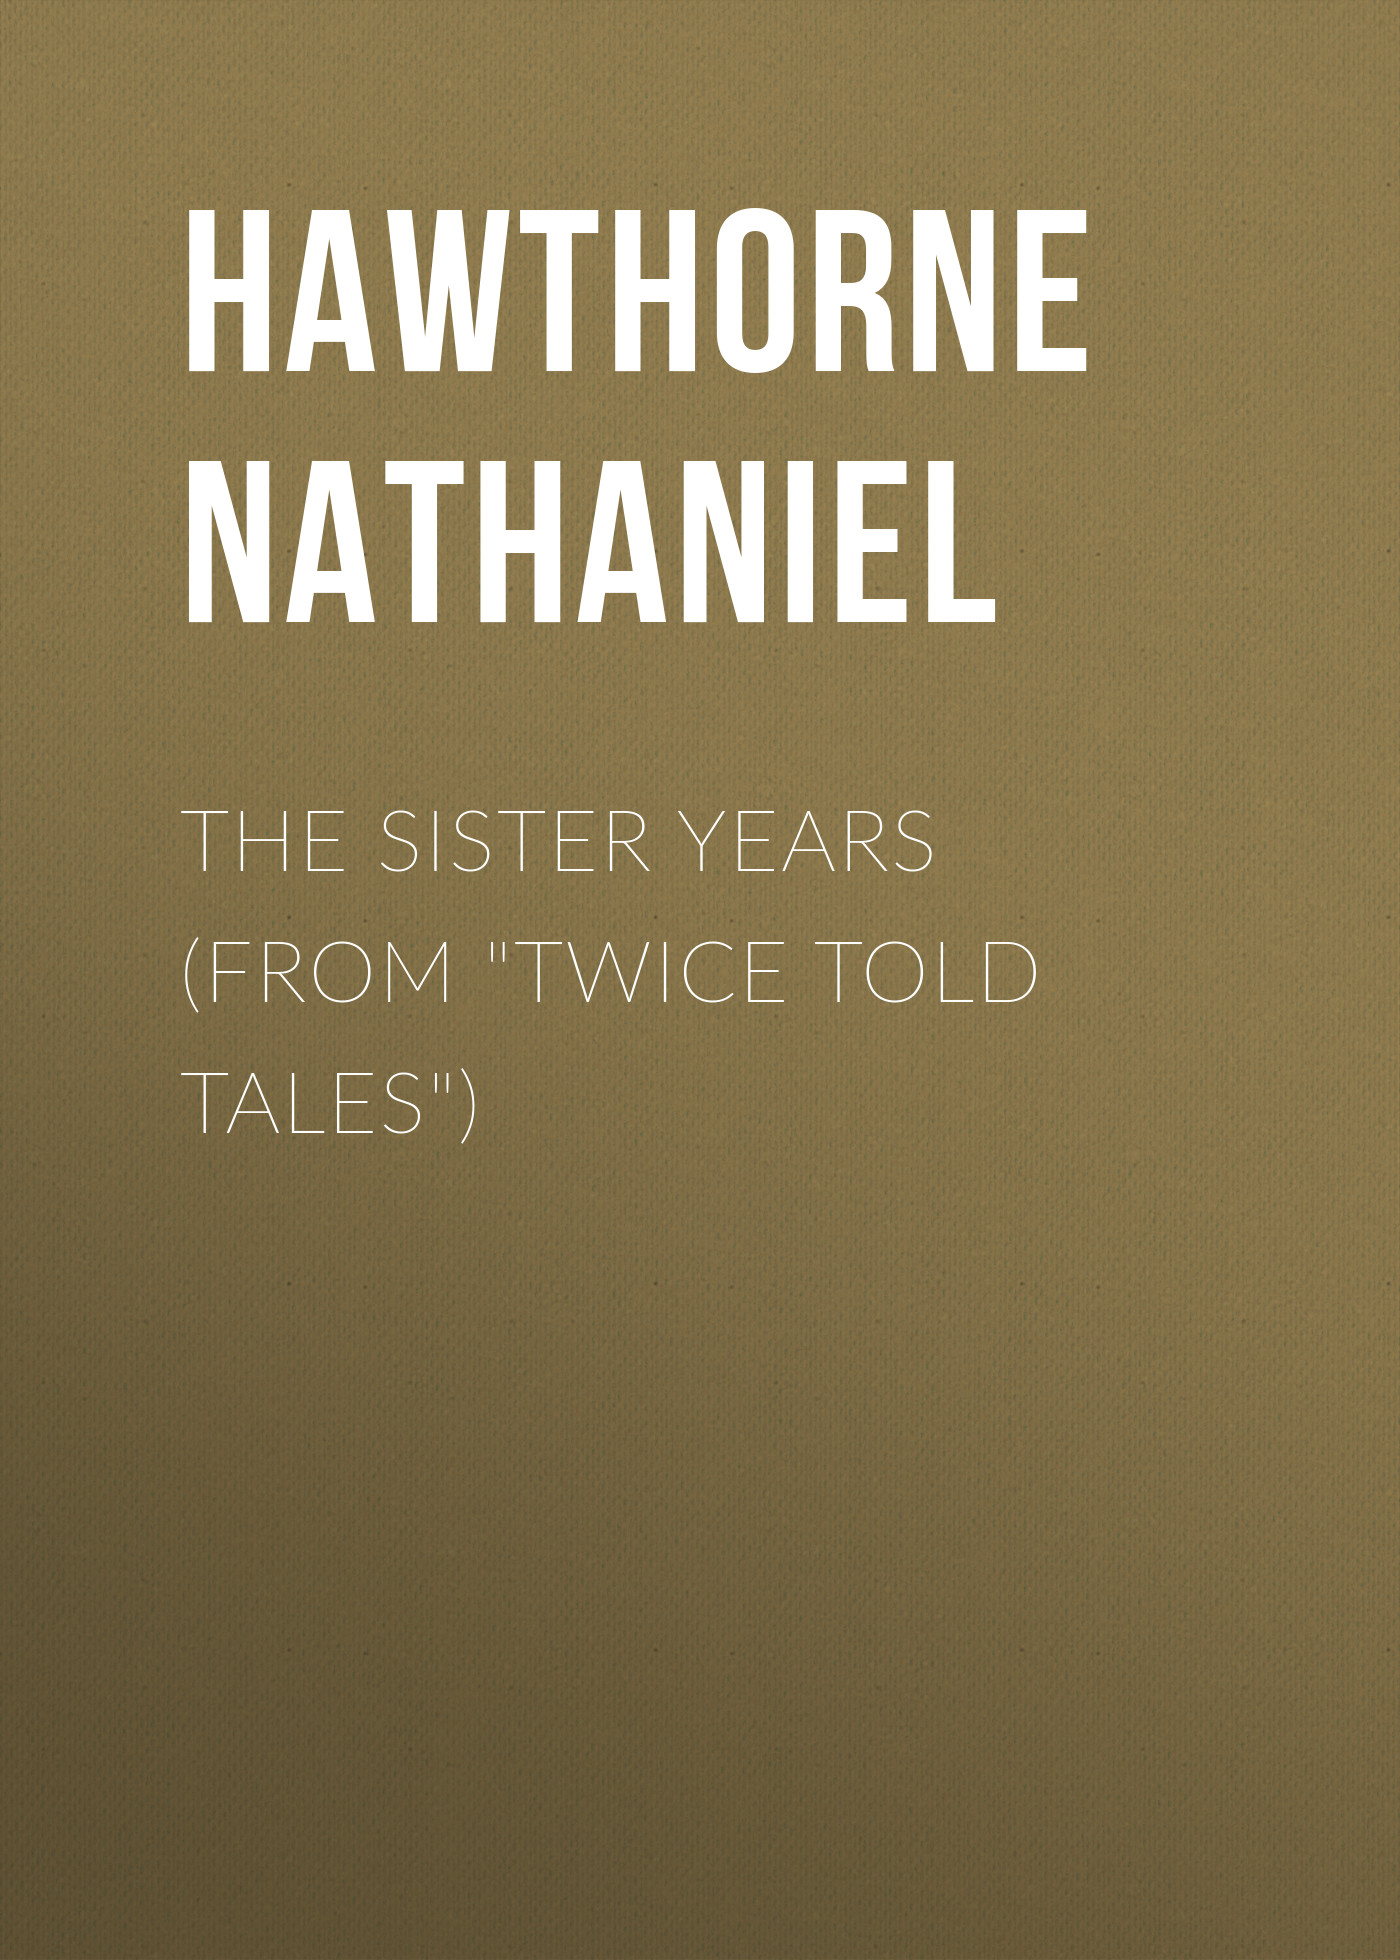 The Sister Years (From"Twice Told Tales")